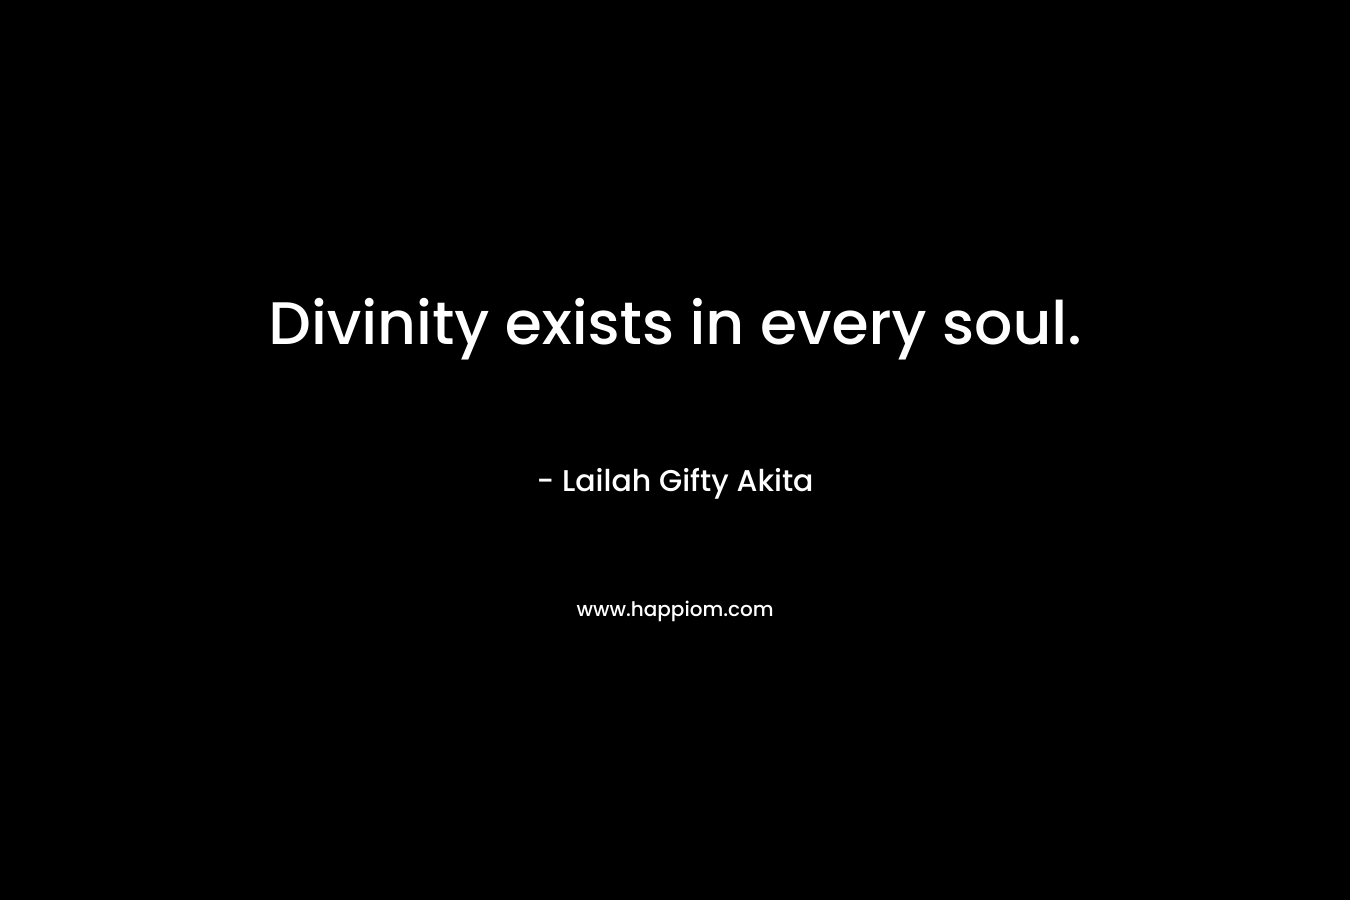 Divinity exists in every soul.